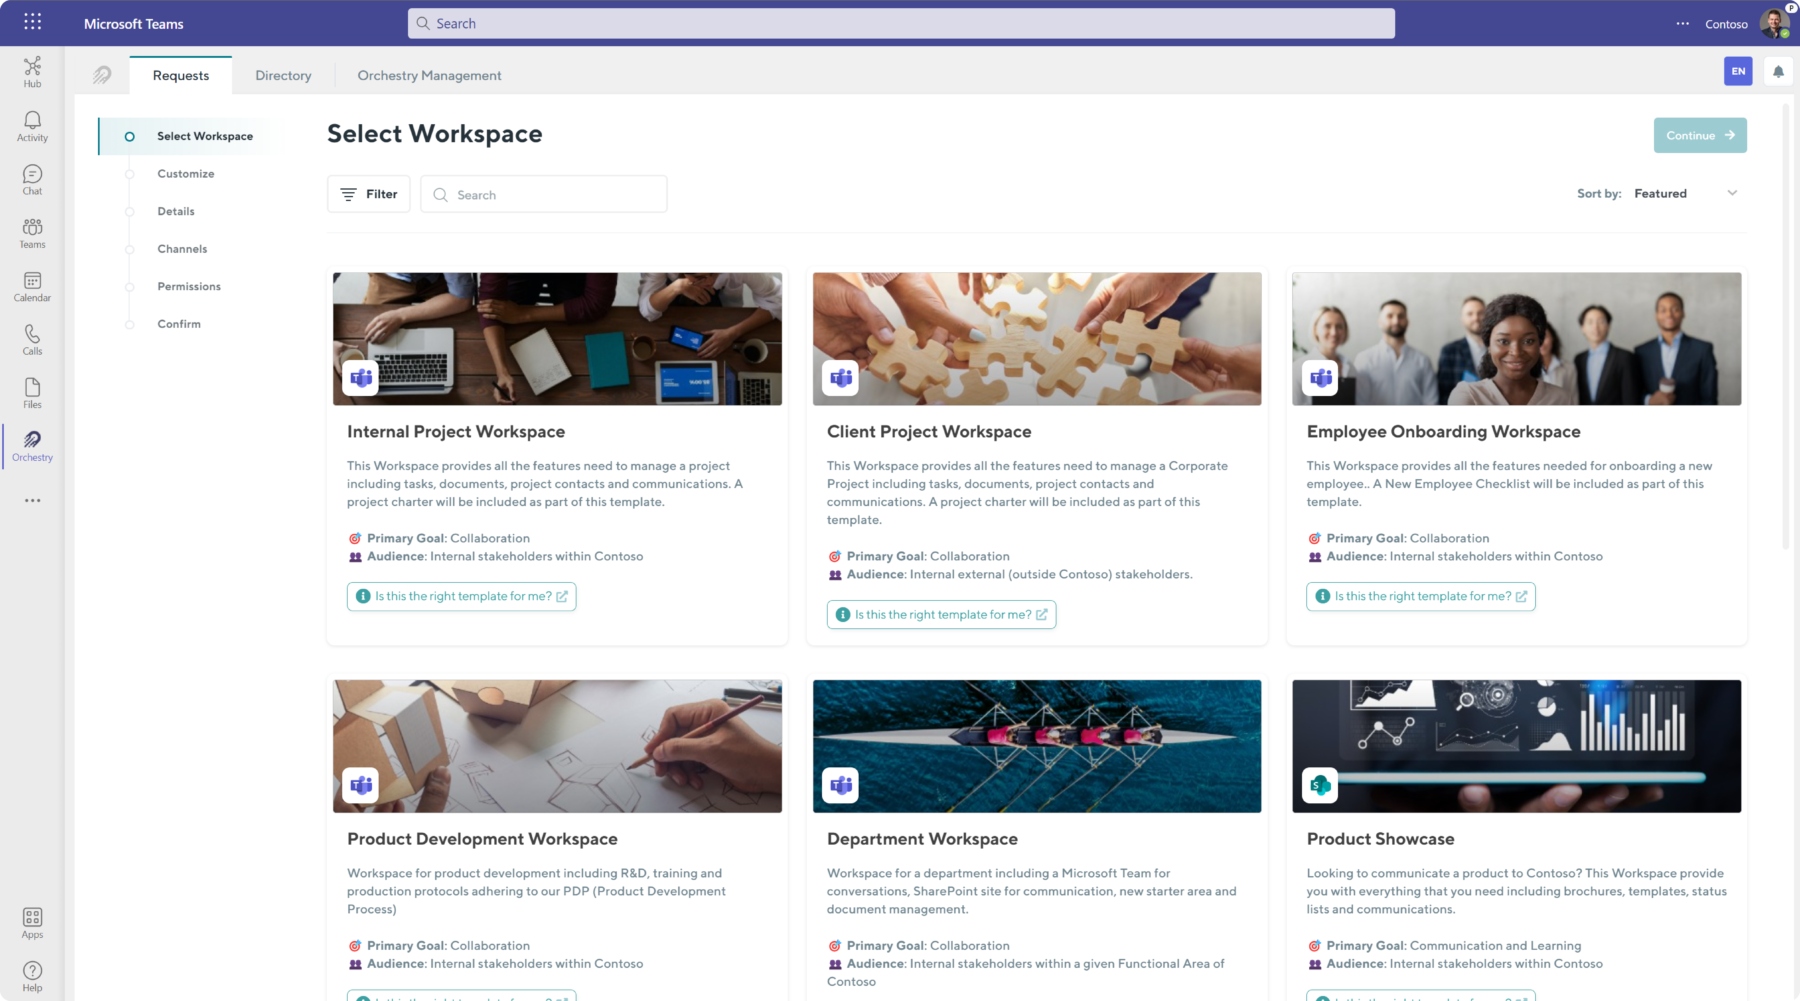 Orchestry's Microsoft Teams template library